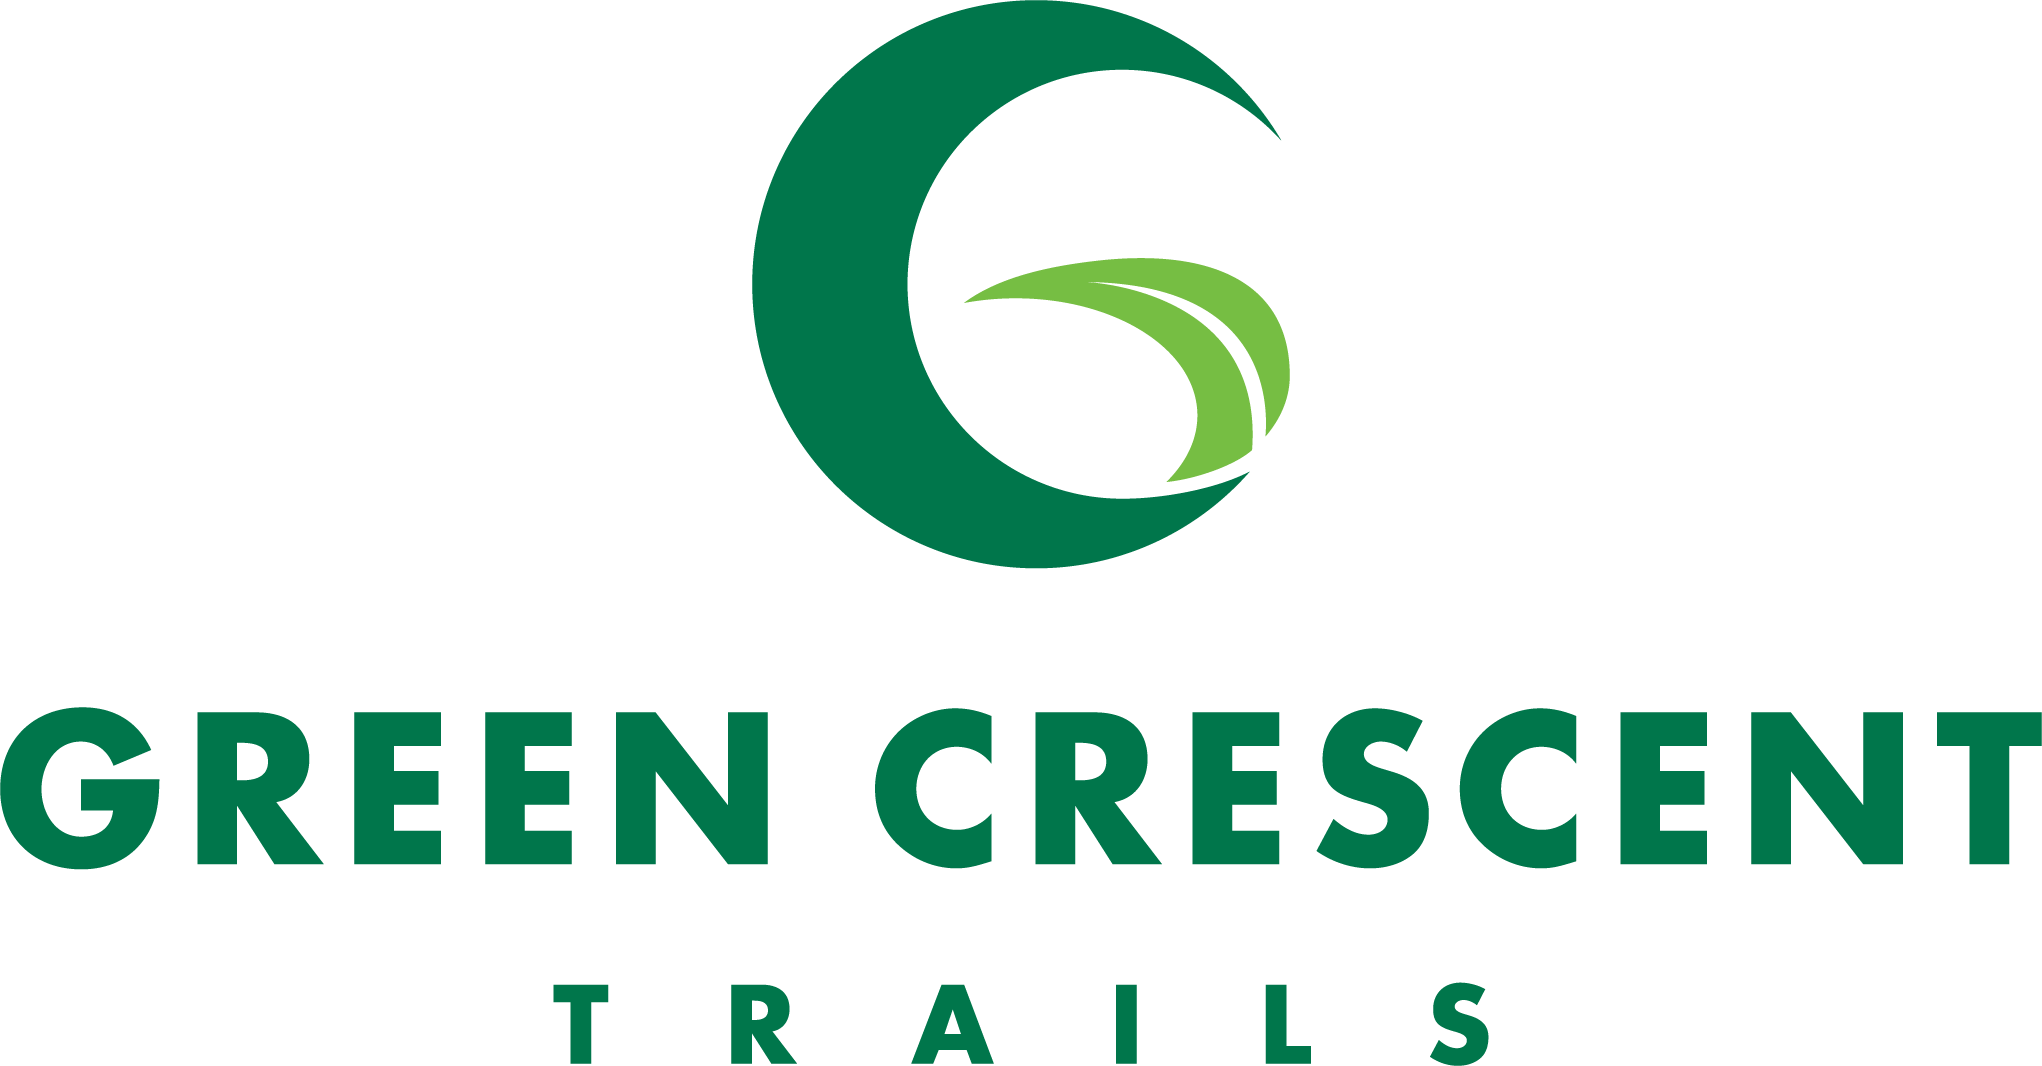 Green Crescent Trail Updates Meeting August 11, 2020 City of